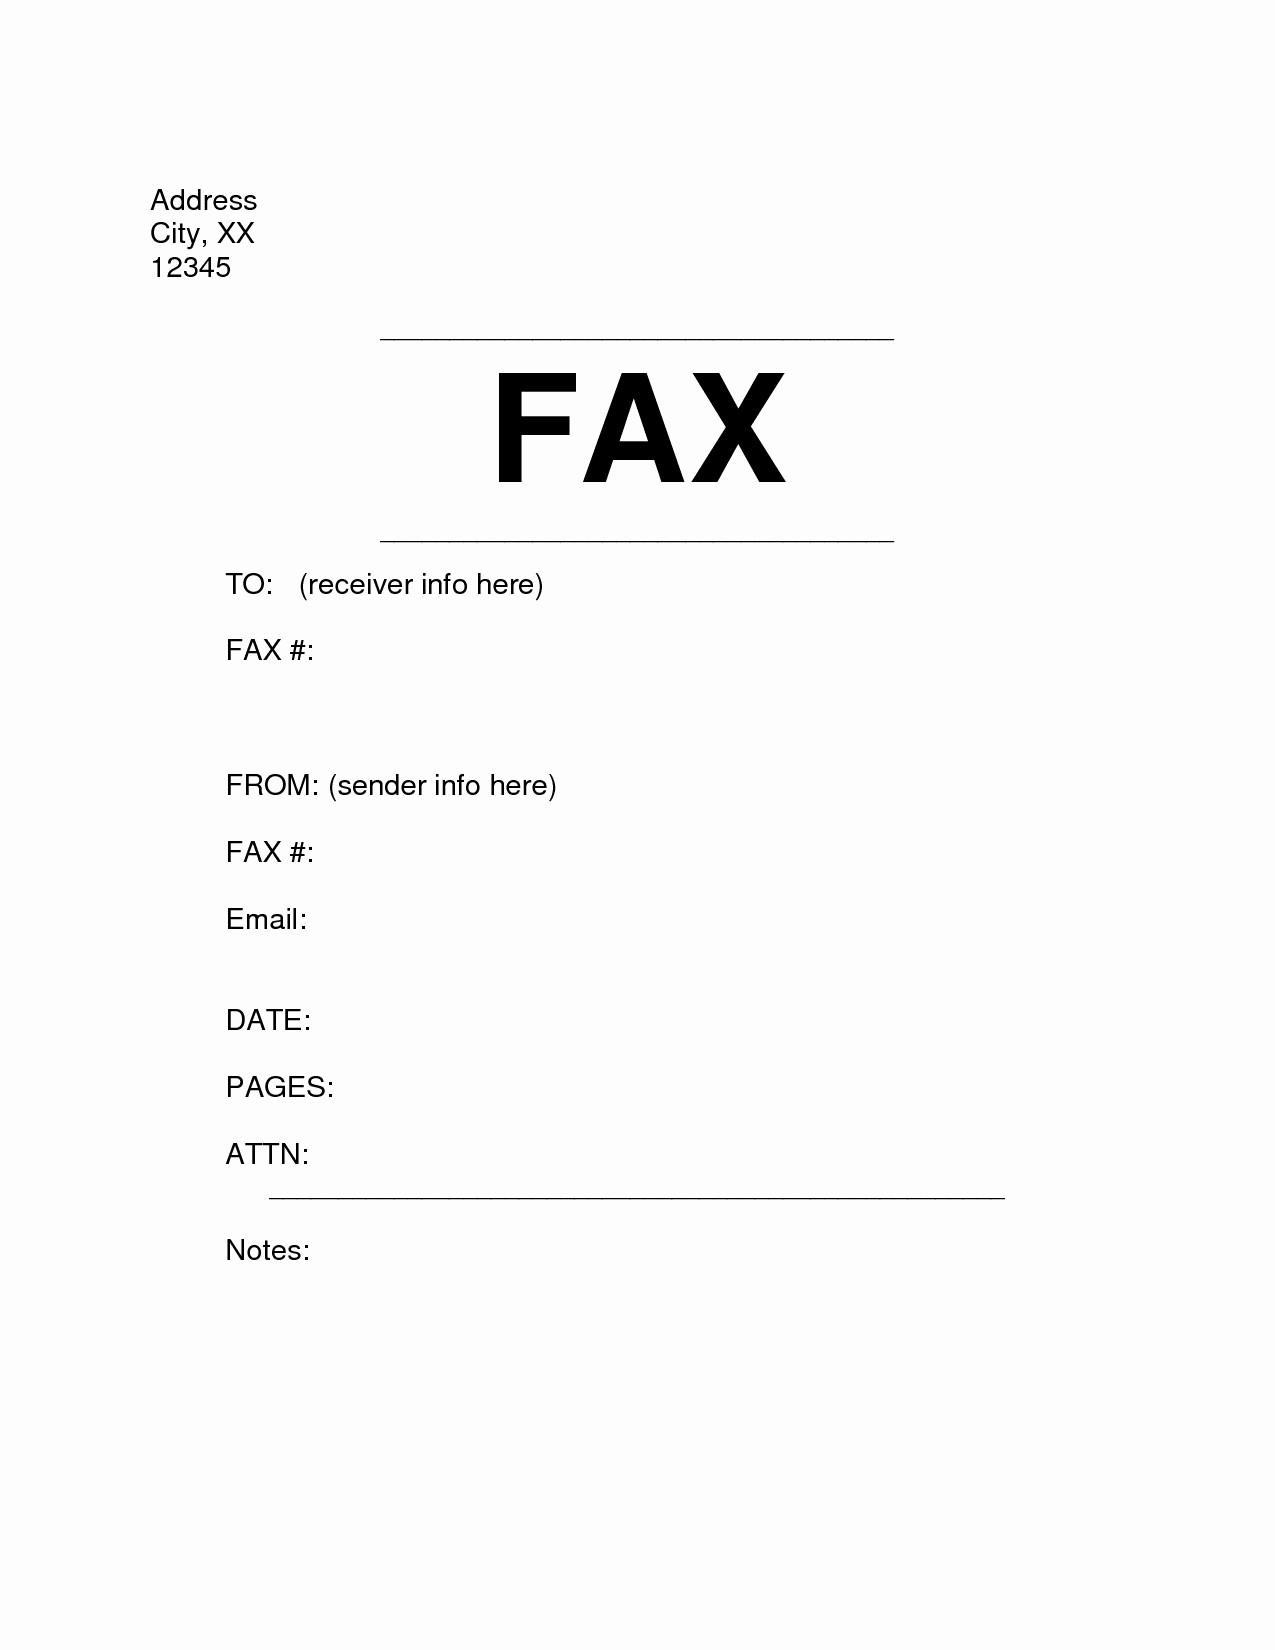 Fax Cover Sheets Microsoft Word Luxury Microsoft Fice Fax Cover Sheet Template